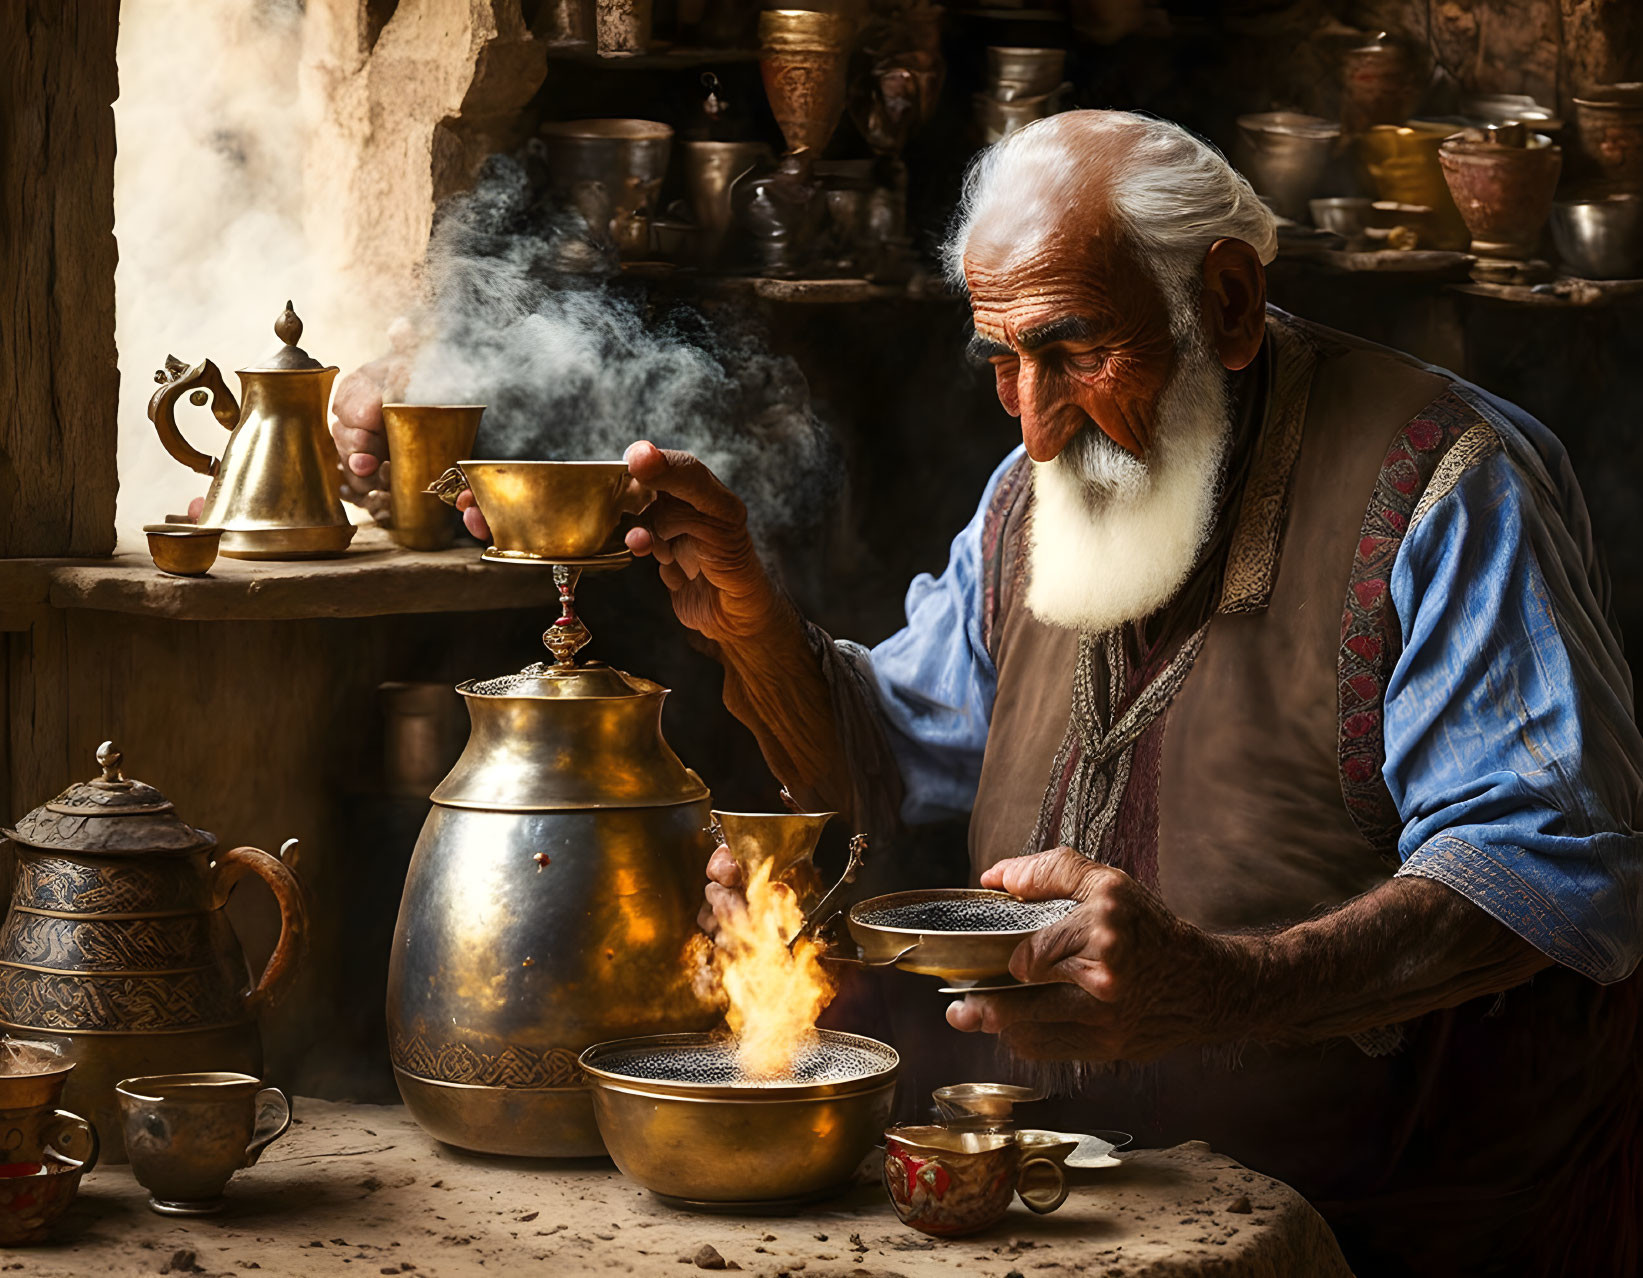 Elderly man pouring hot beverage from metal teapot in rustic setting